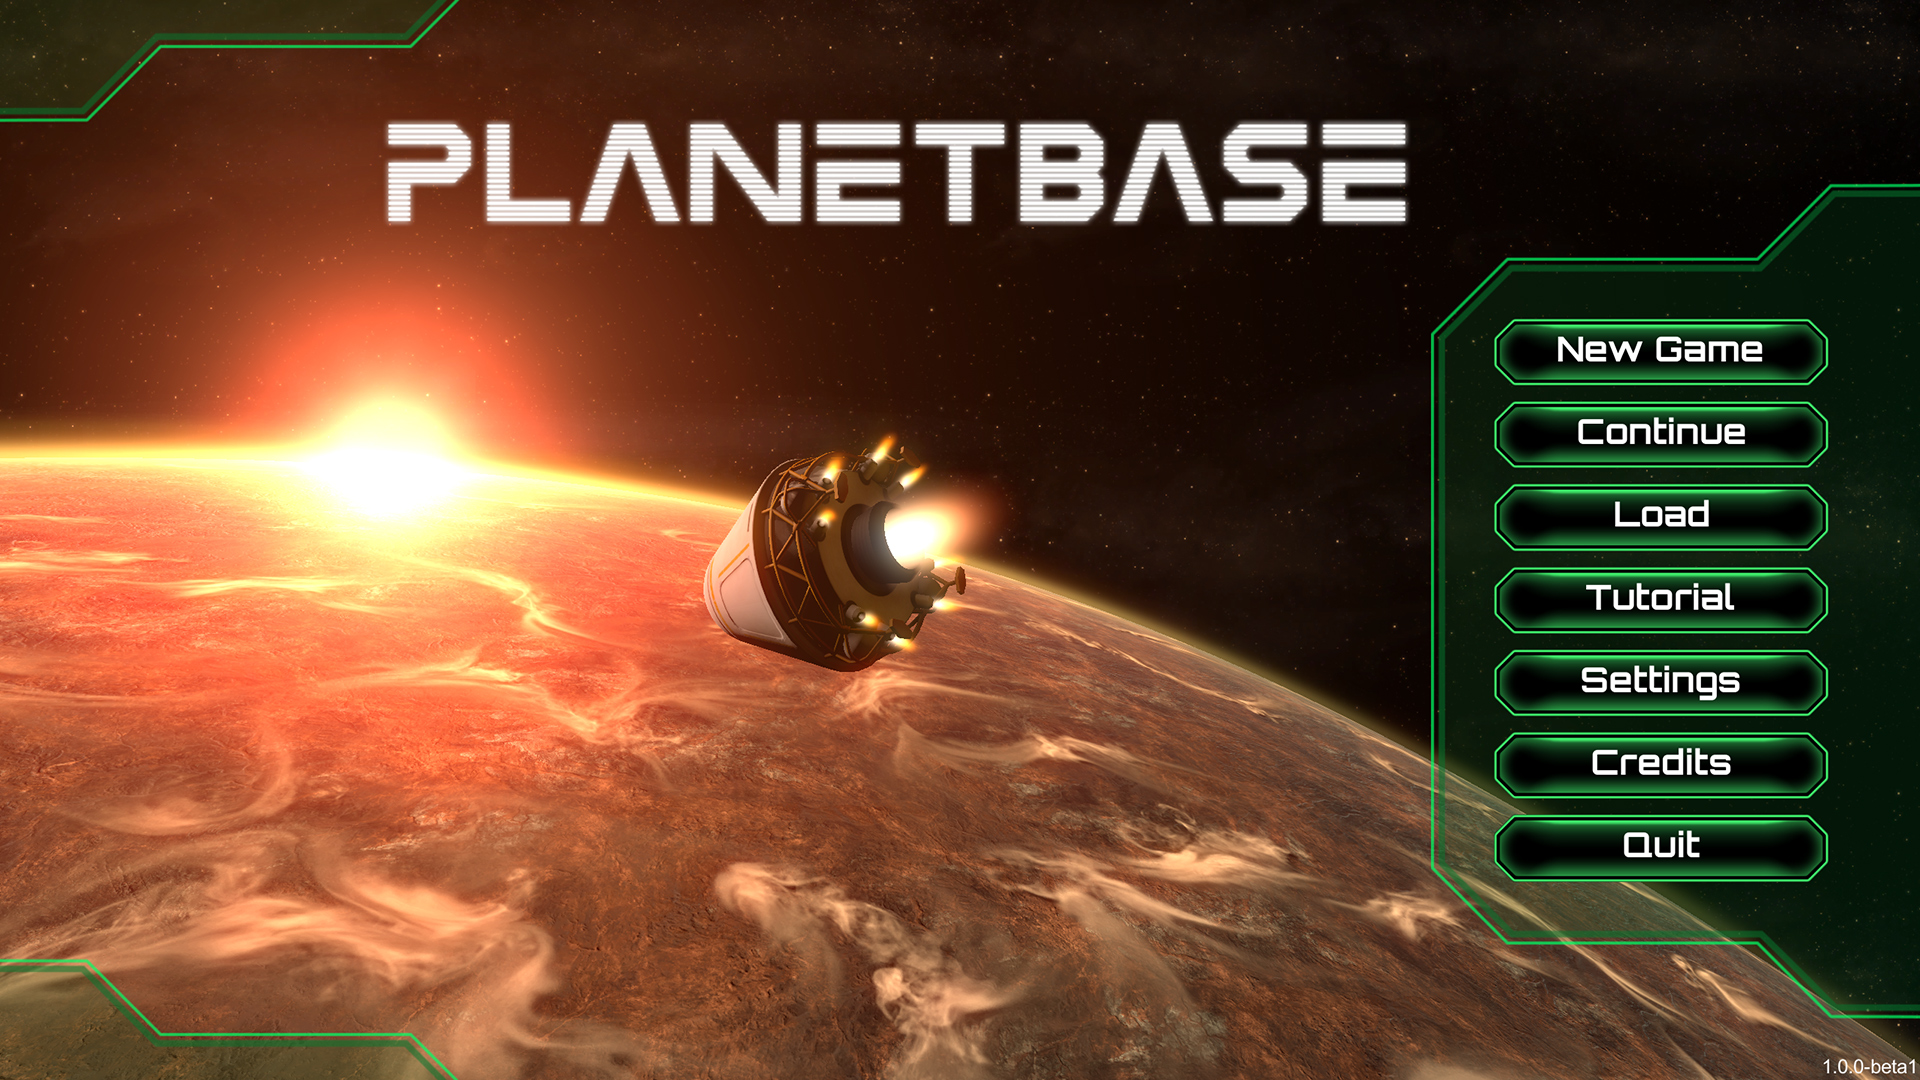 Save 50% on Planetbase on Steam